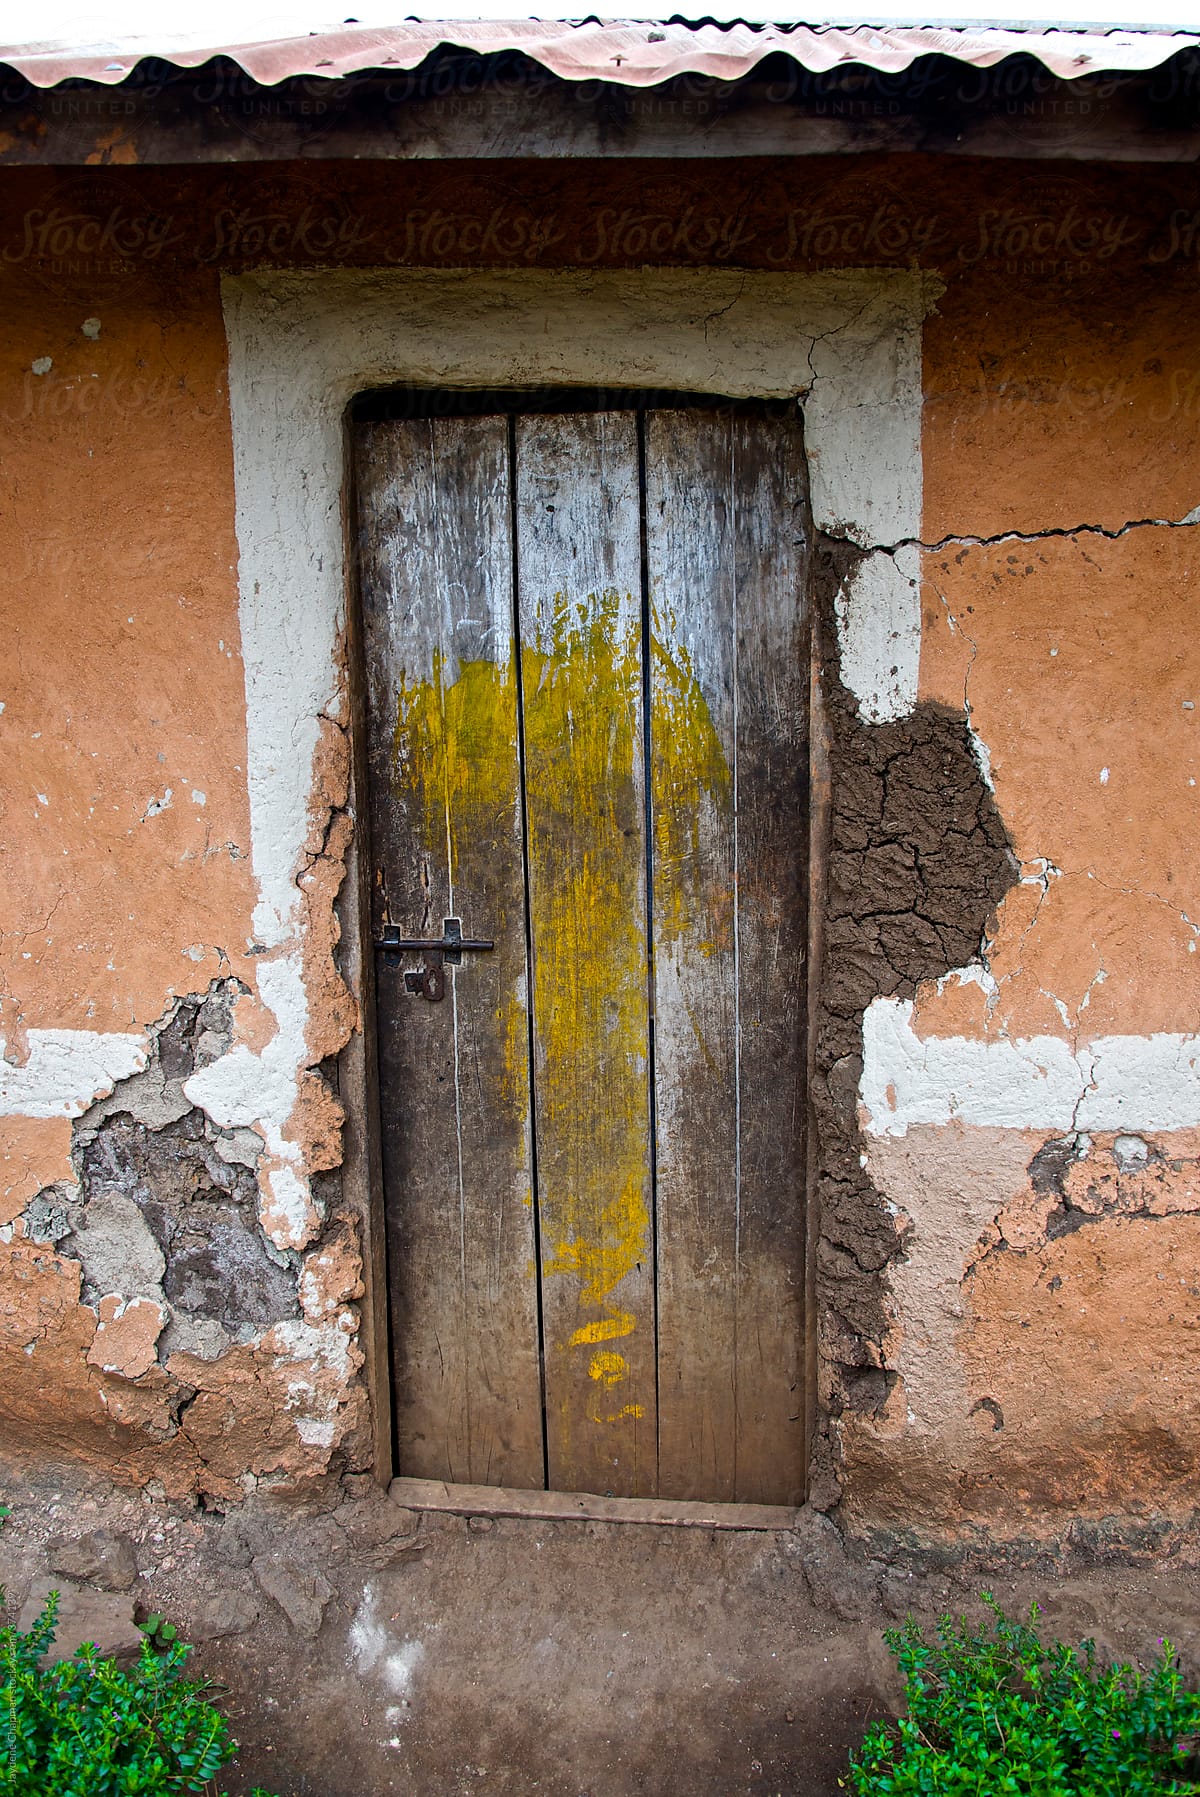 Old cracked poor house  in small village community, Uganda, Africa